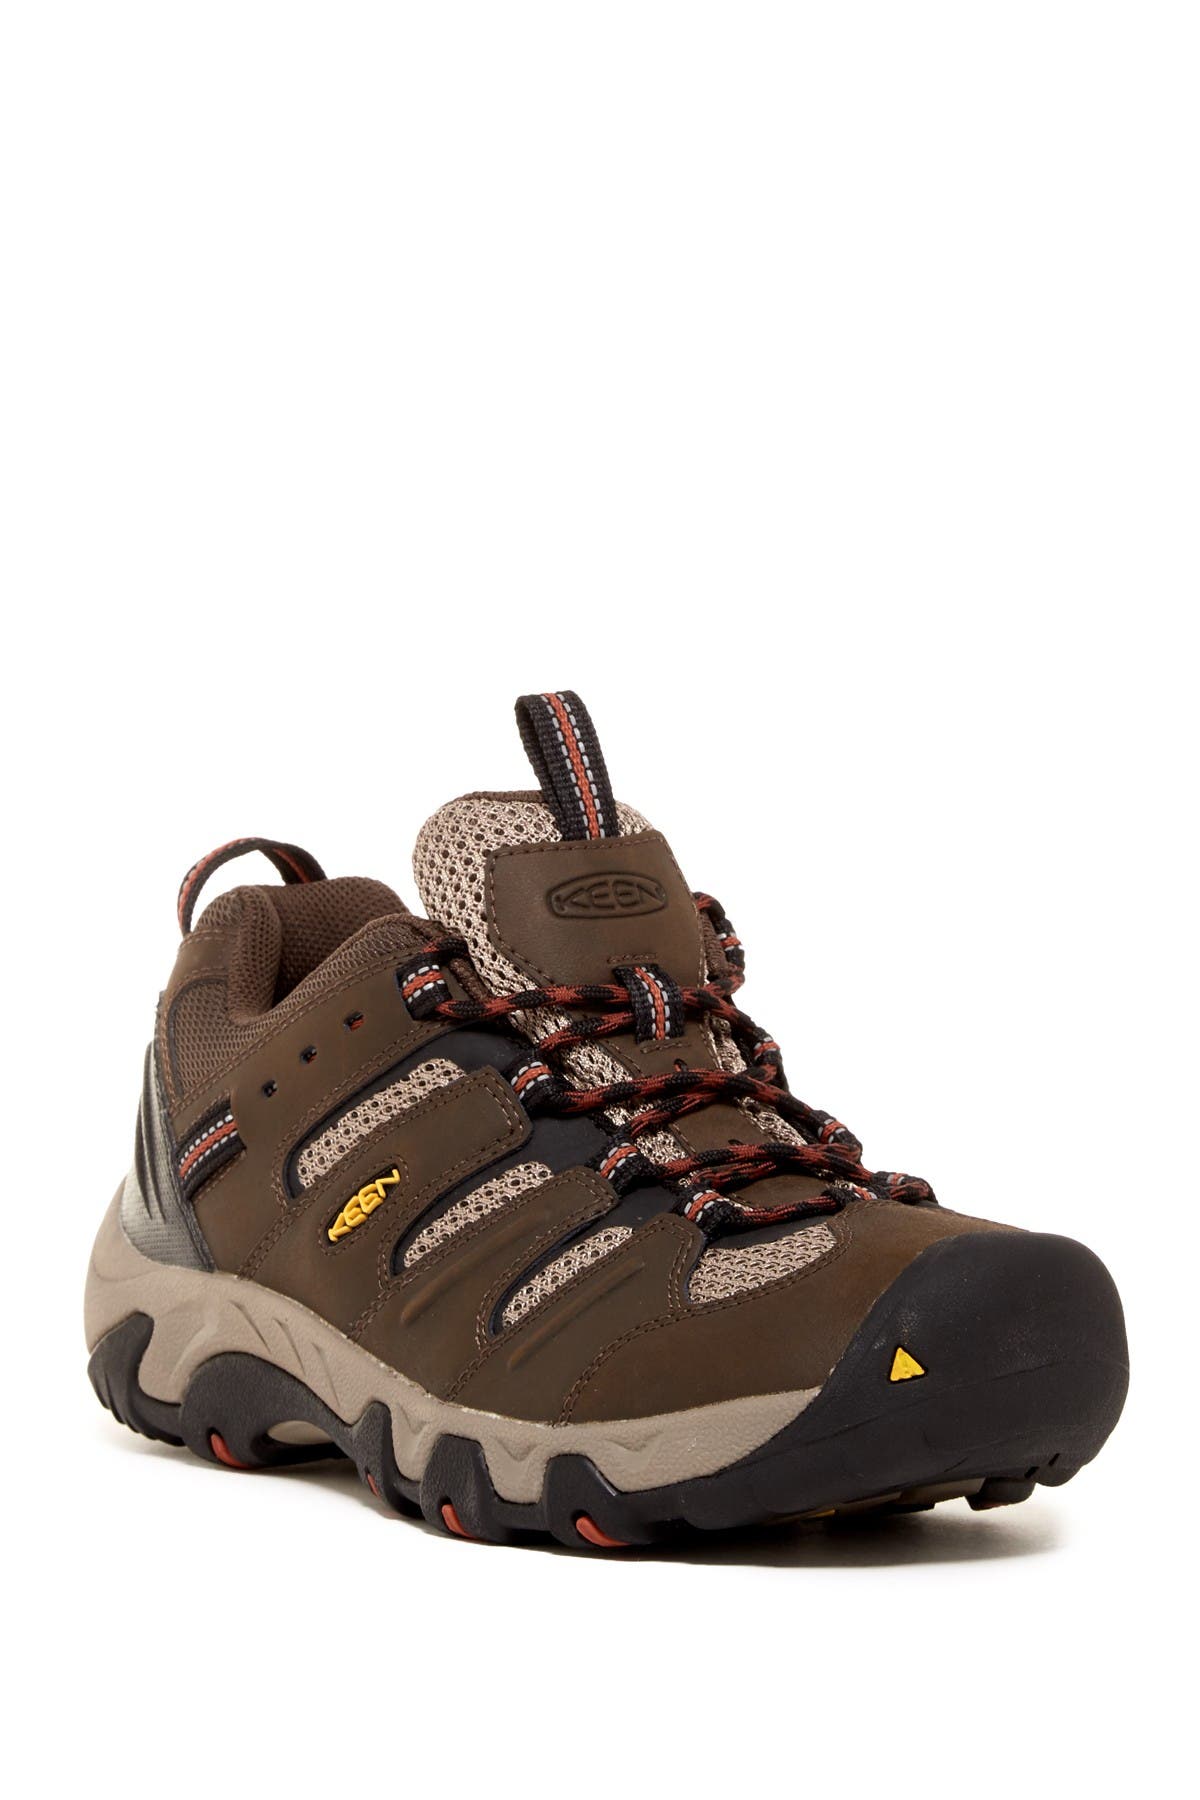 keen koven hiking shoes